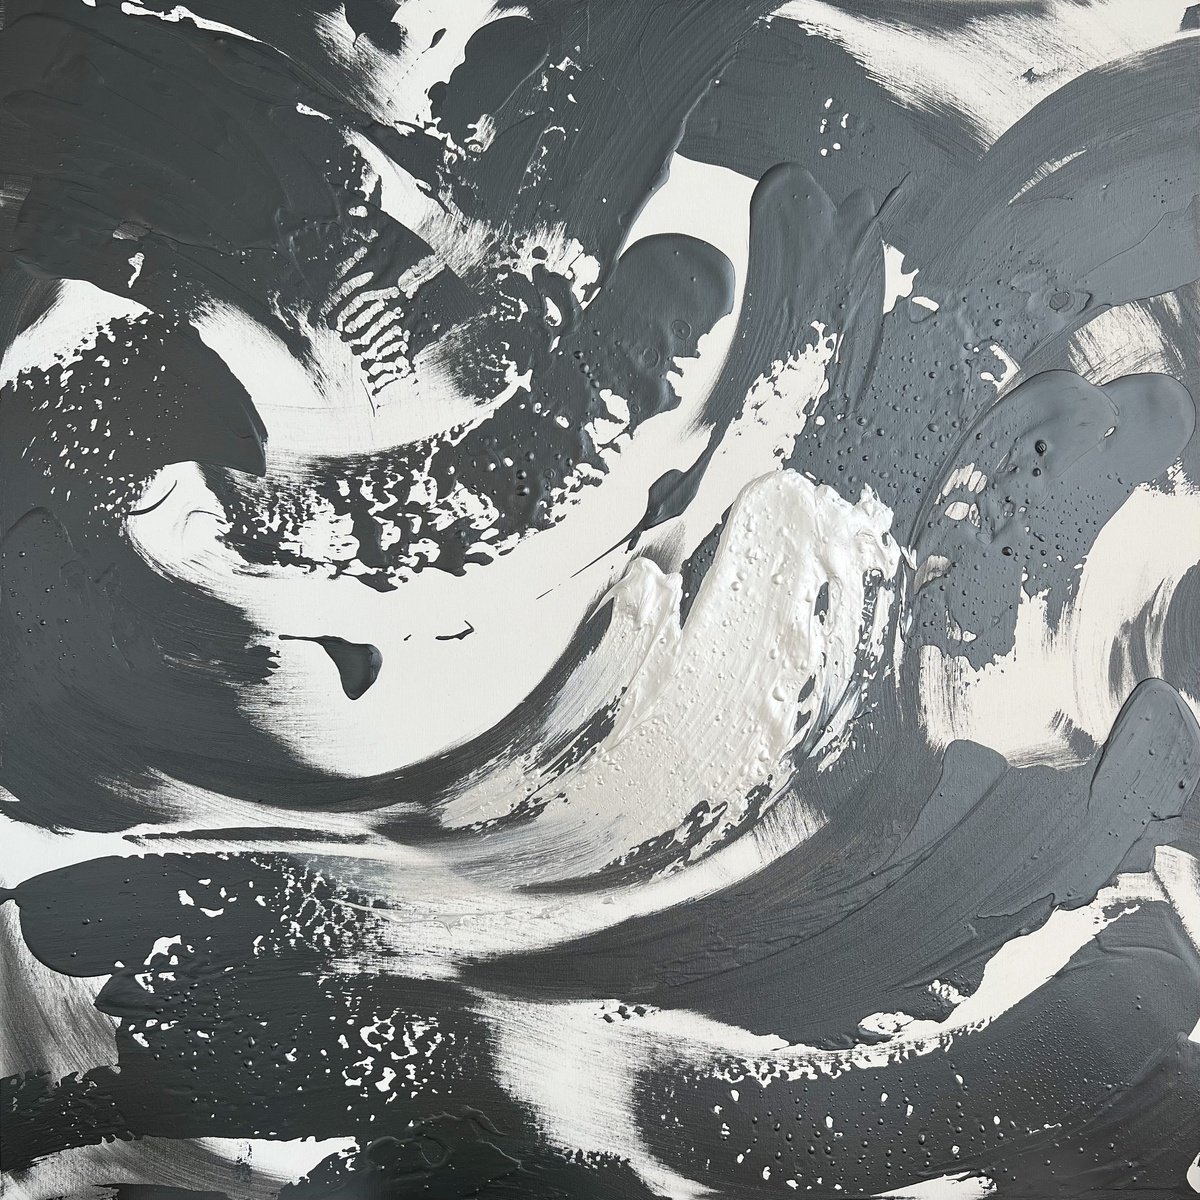 Gray and Black Silver Abstract on canvas. Emotional explosion. by Marina Skromova